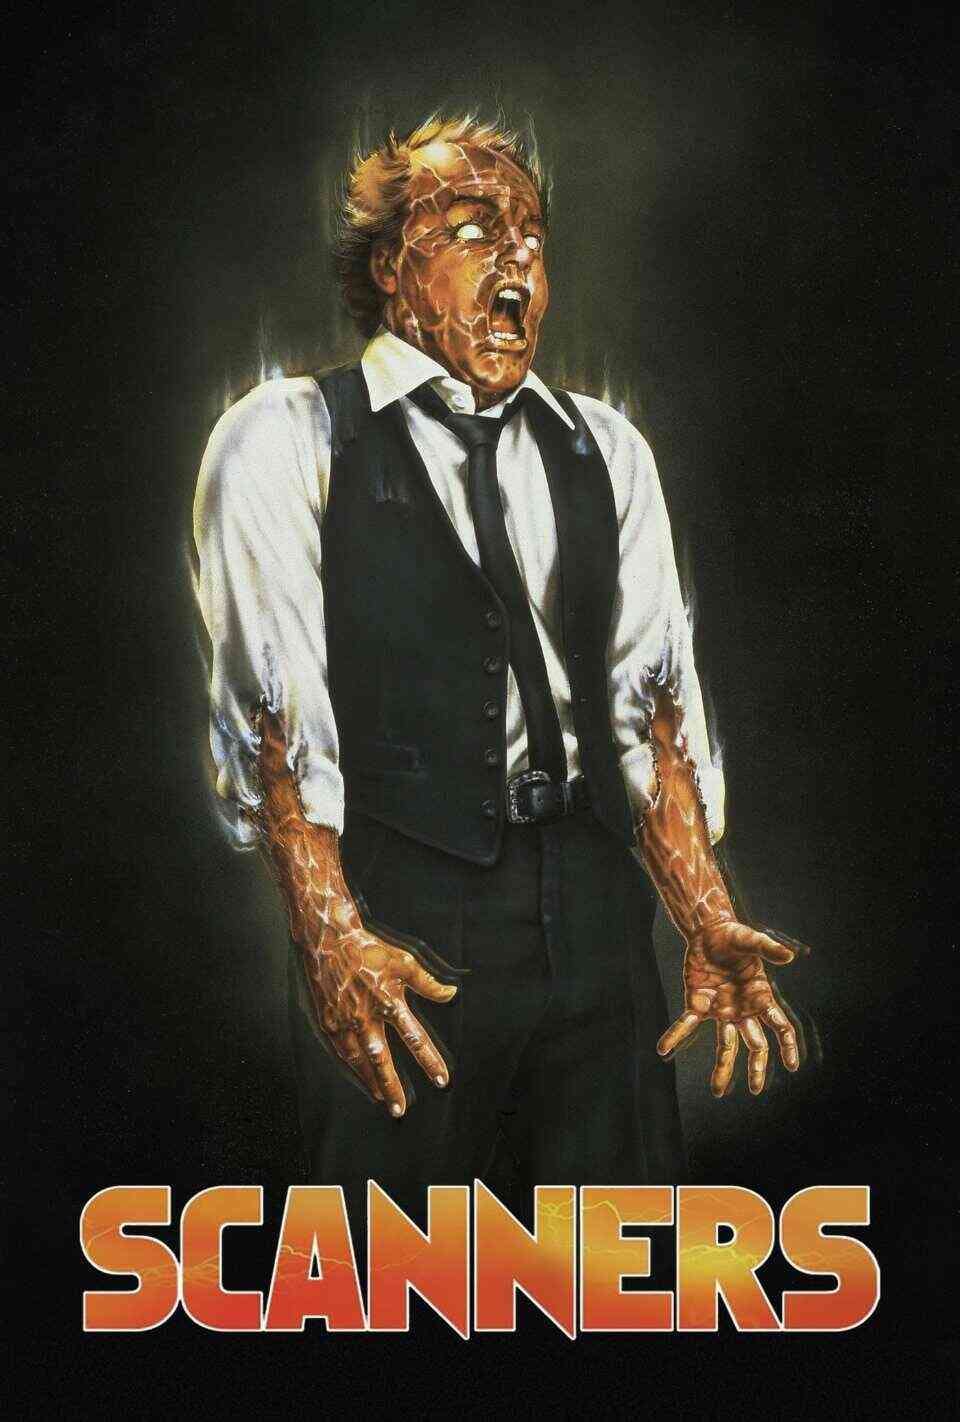 Read Scanners screenplay (poster)